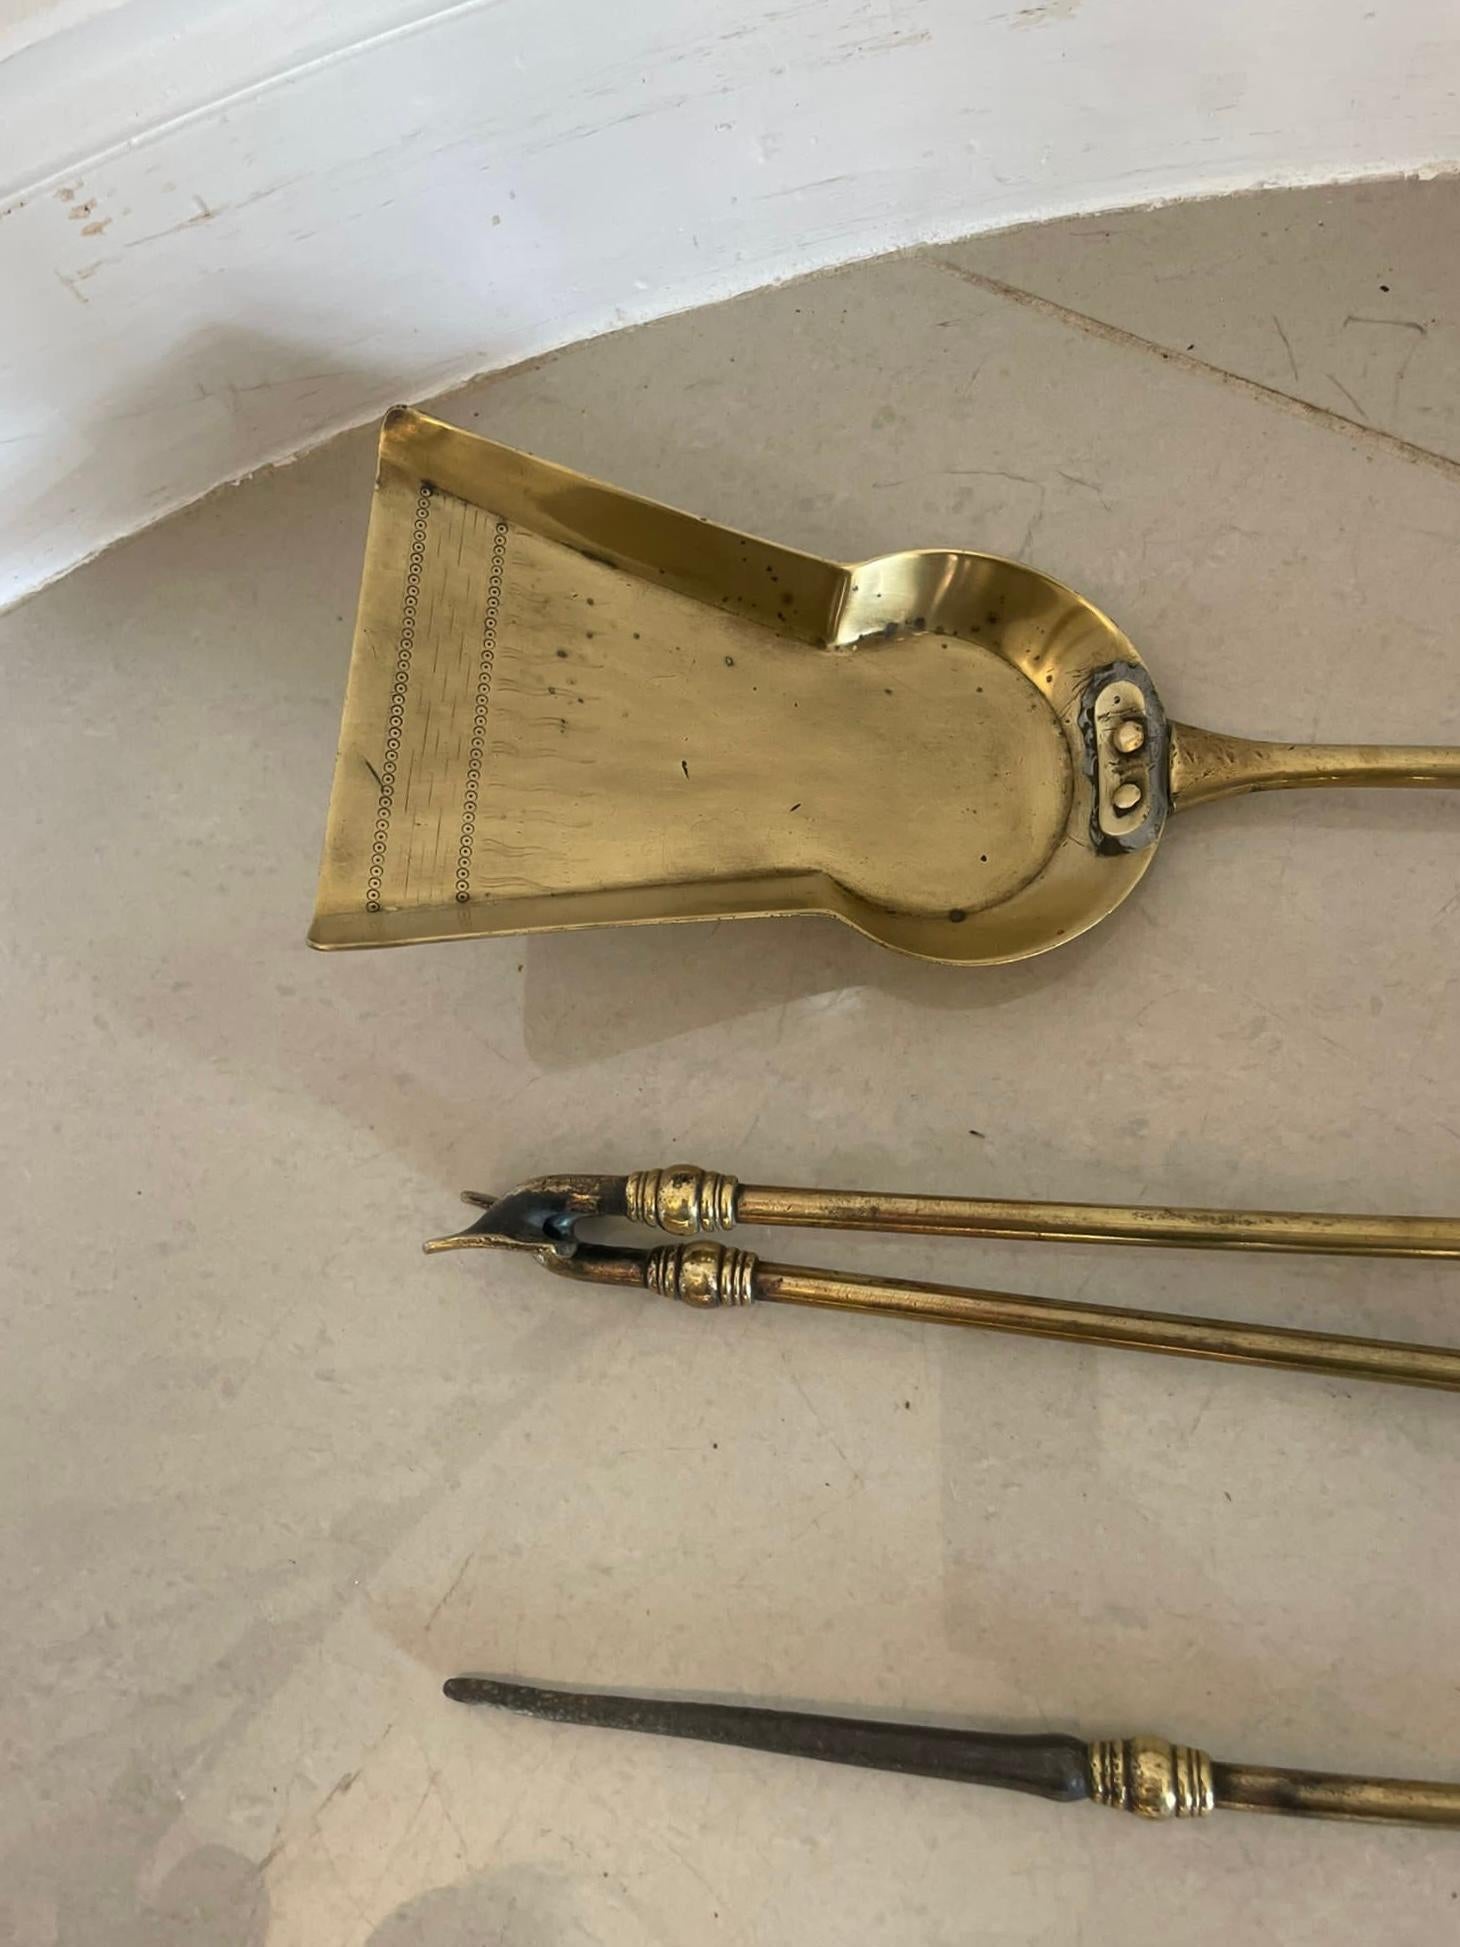 Antique set of three Victorian quality brass fire irons consisting of a quality brass shovel, poker and fire tongs


Dimensions:
Height 69 cm 
Width 15 cm 
Depth 3 cm


Dated 1860
